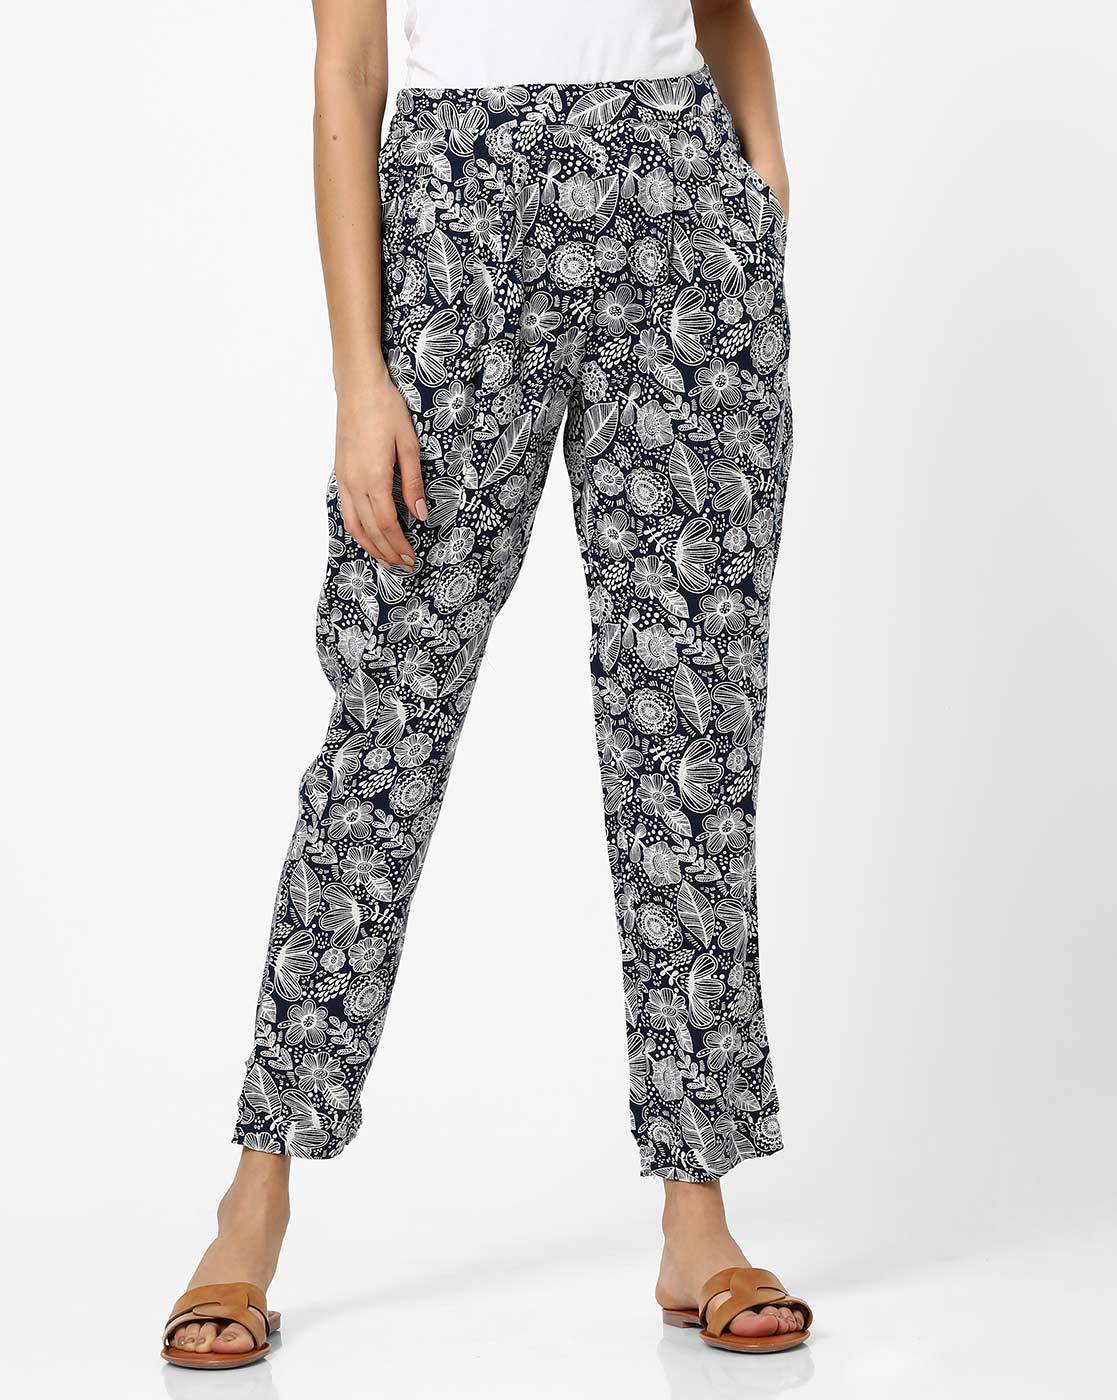 Aura Black Floral Trousers  Want That Trend